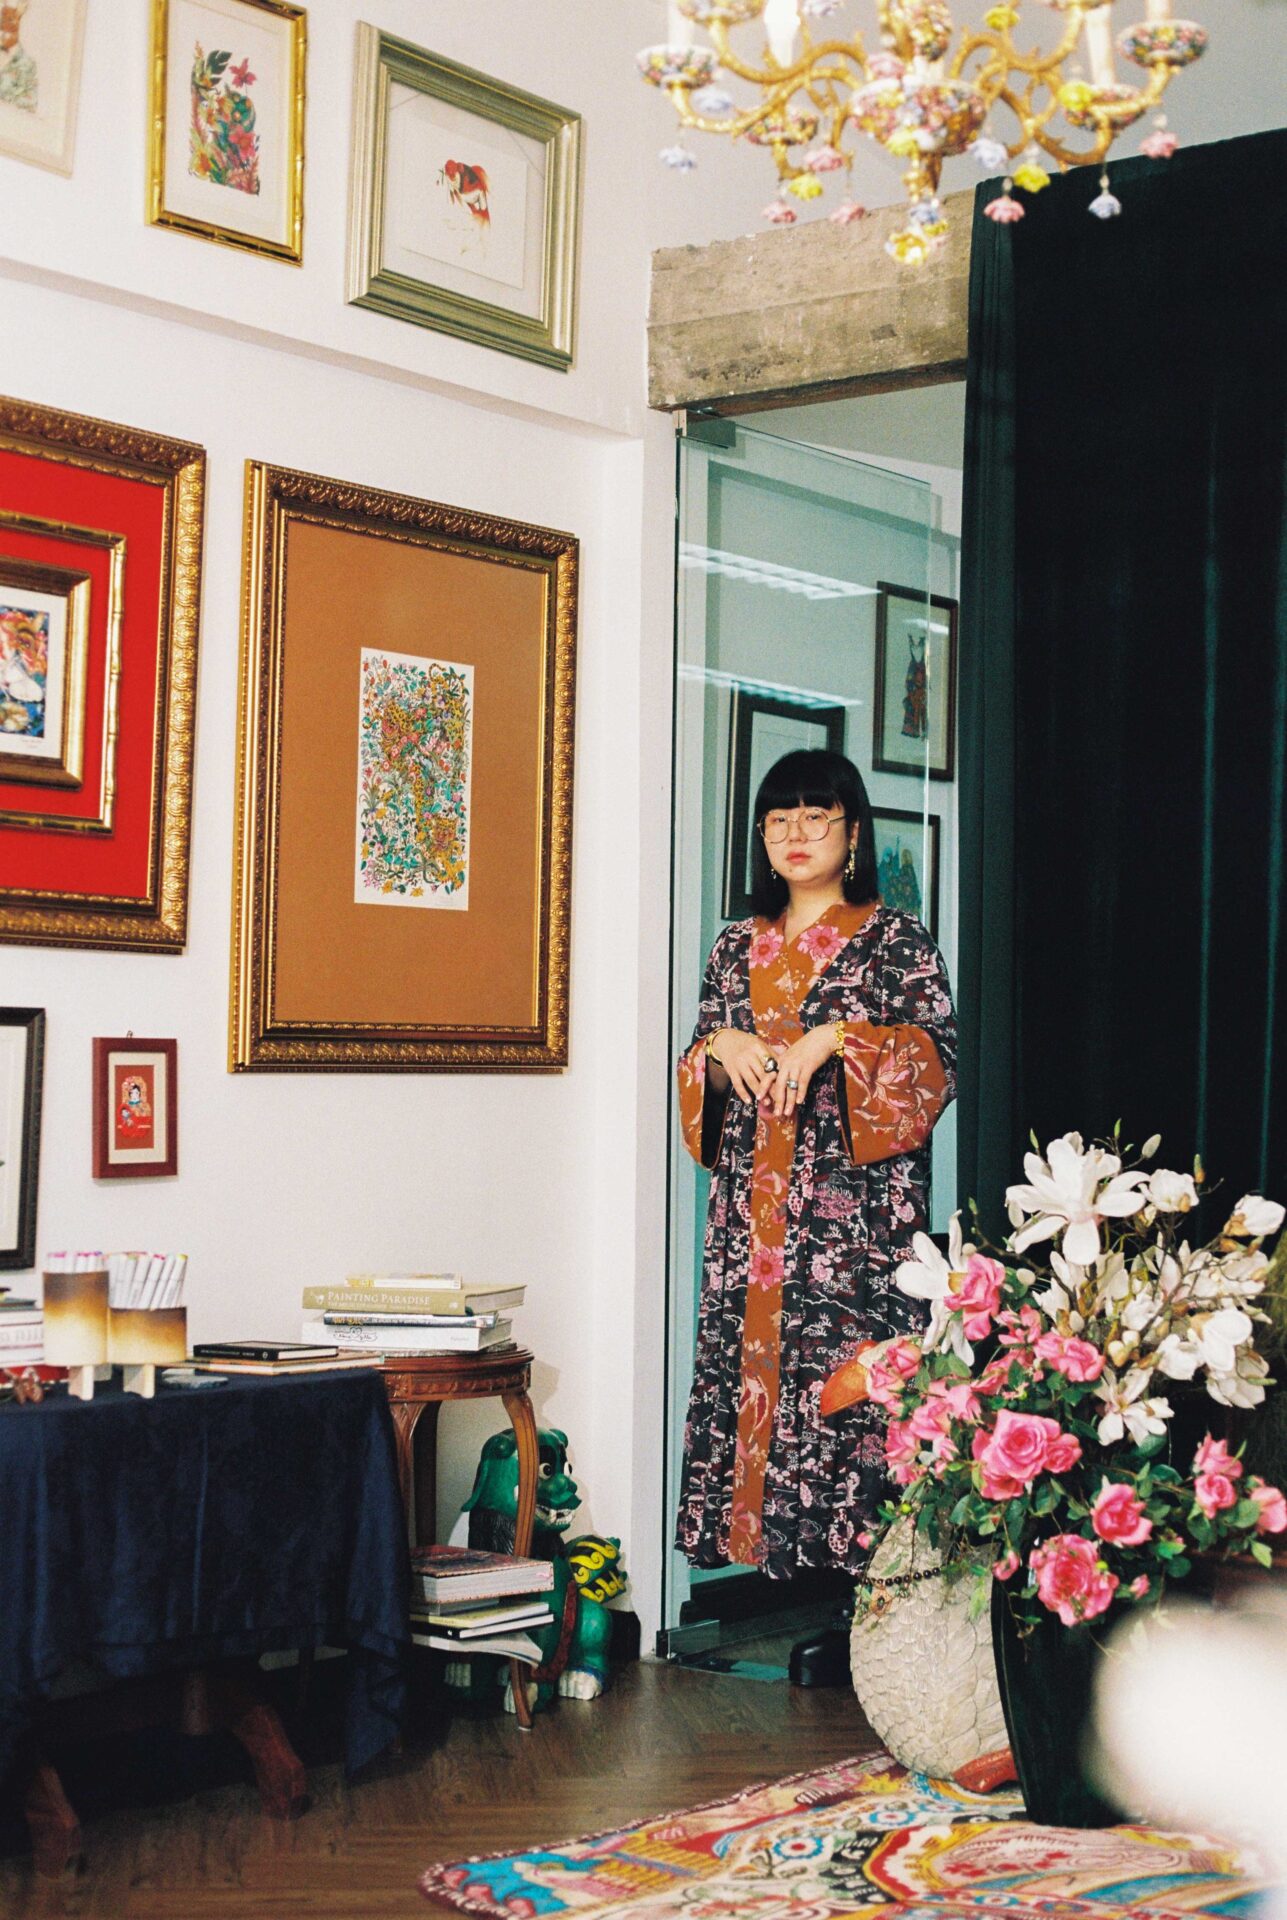 Phannapast | The Bangkok artist wearing a floral kimono in her studio, with white walls and colourful artwork in frames